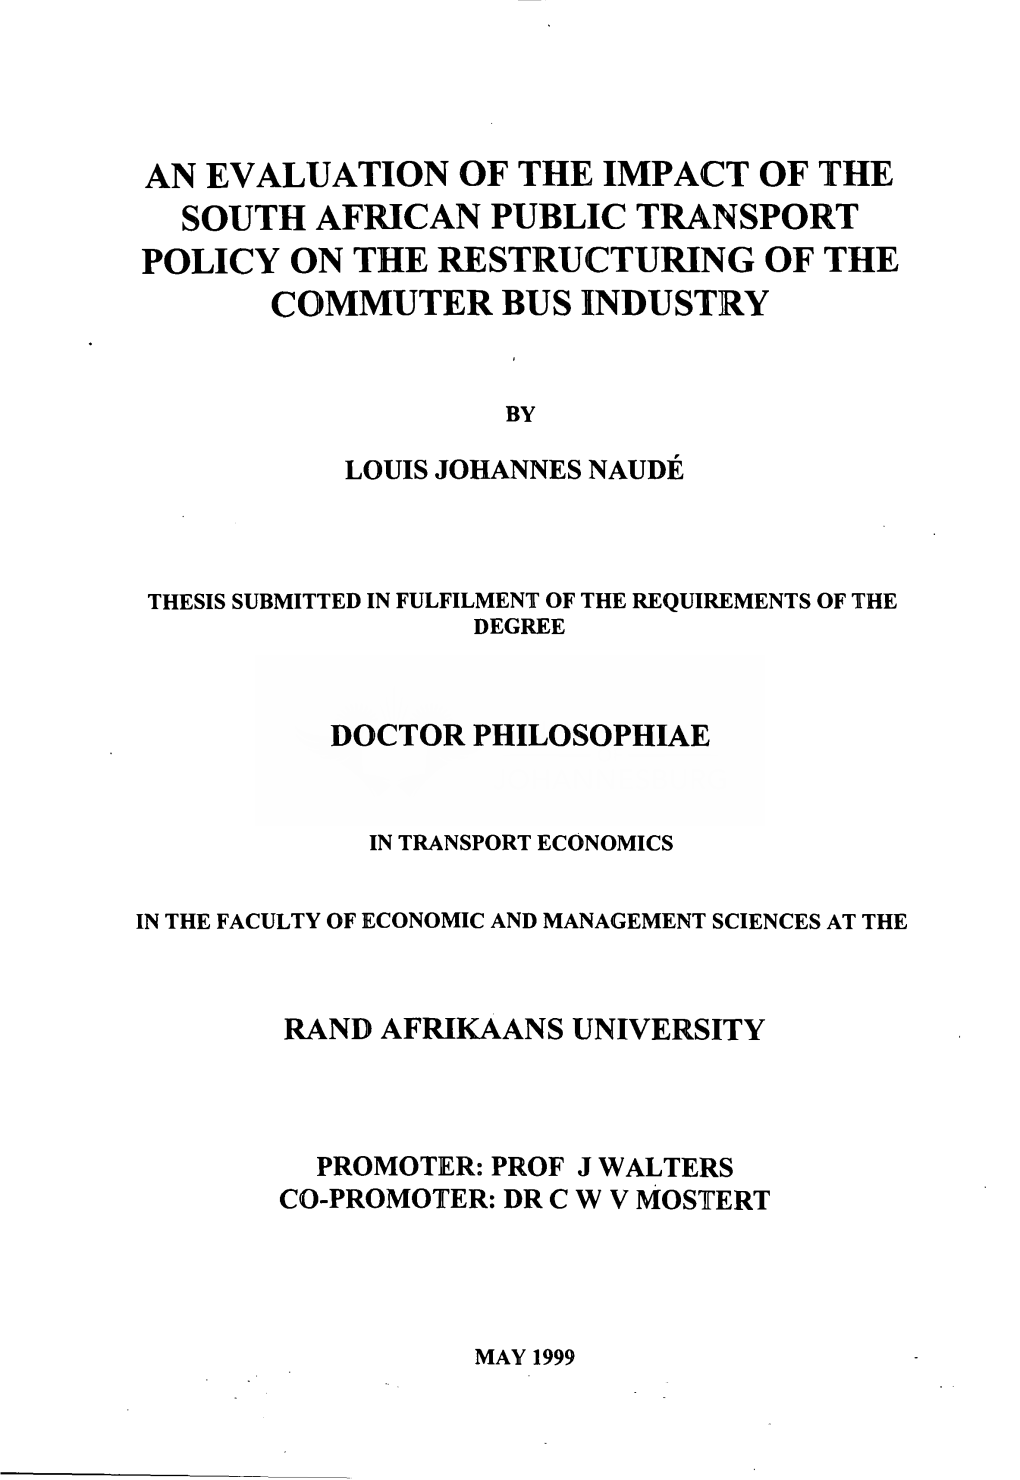 An Evaluation of the Impact of the South African Public Transport Policy on the Restructuring of the Commuter Bus Industry